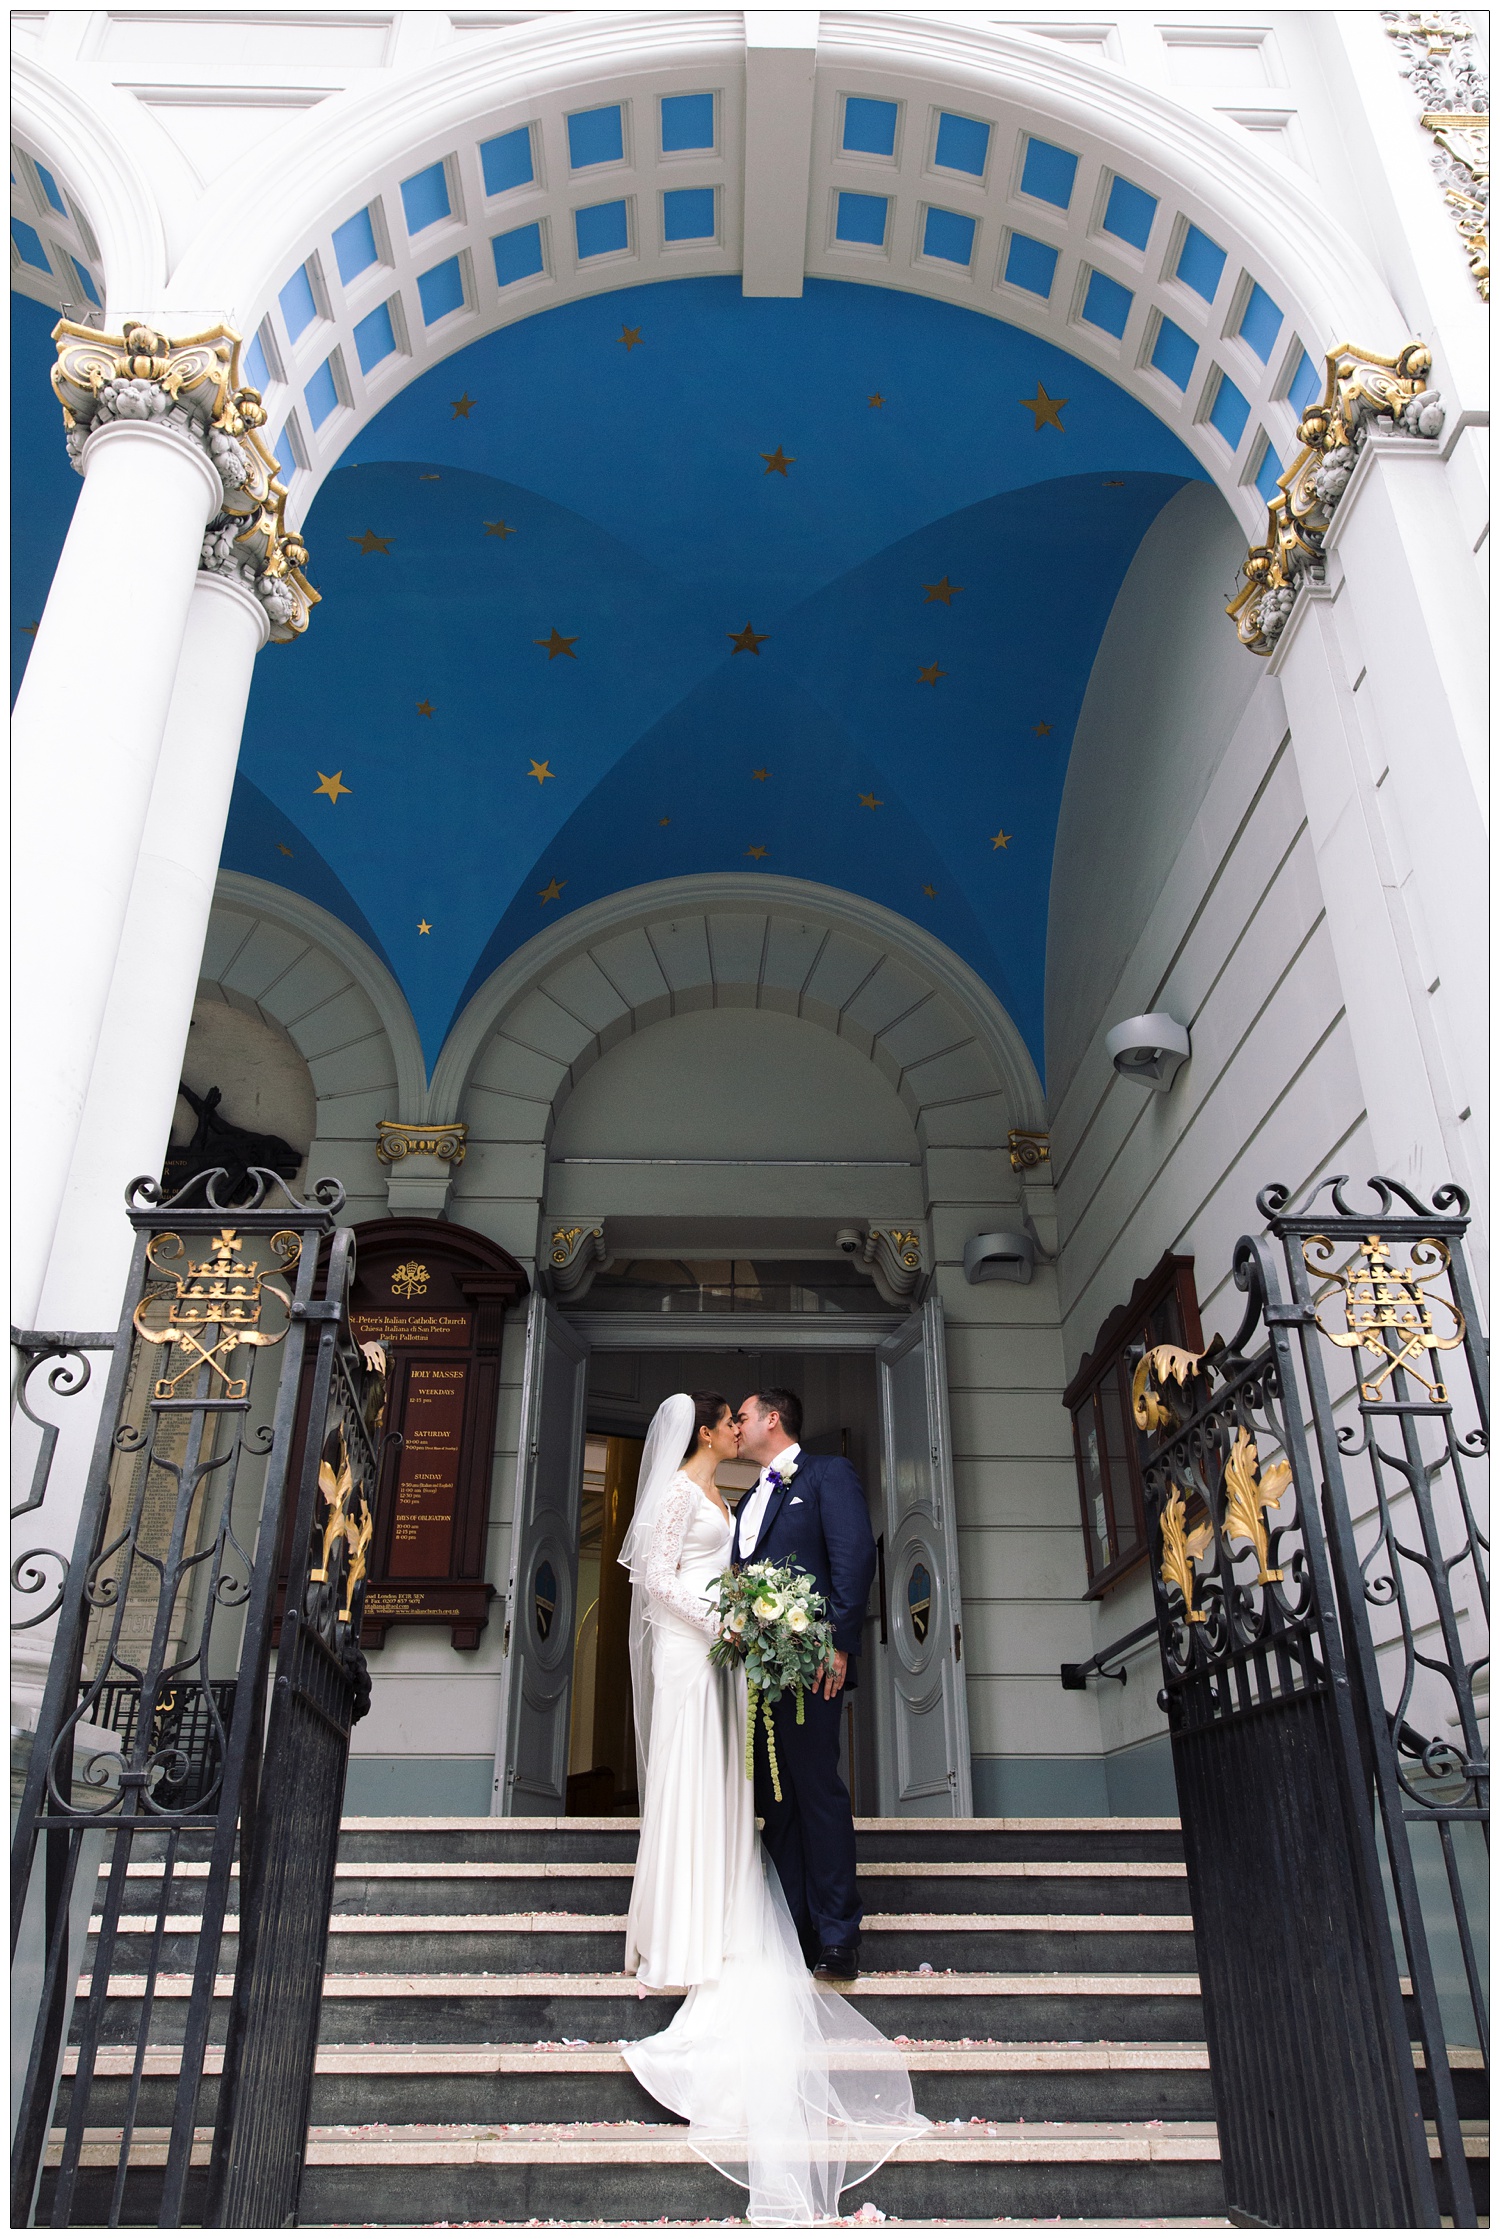 Bride and groom kiss on the steps of St. Peter's Italian Church in Clerkenwell.